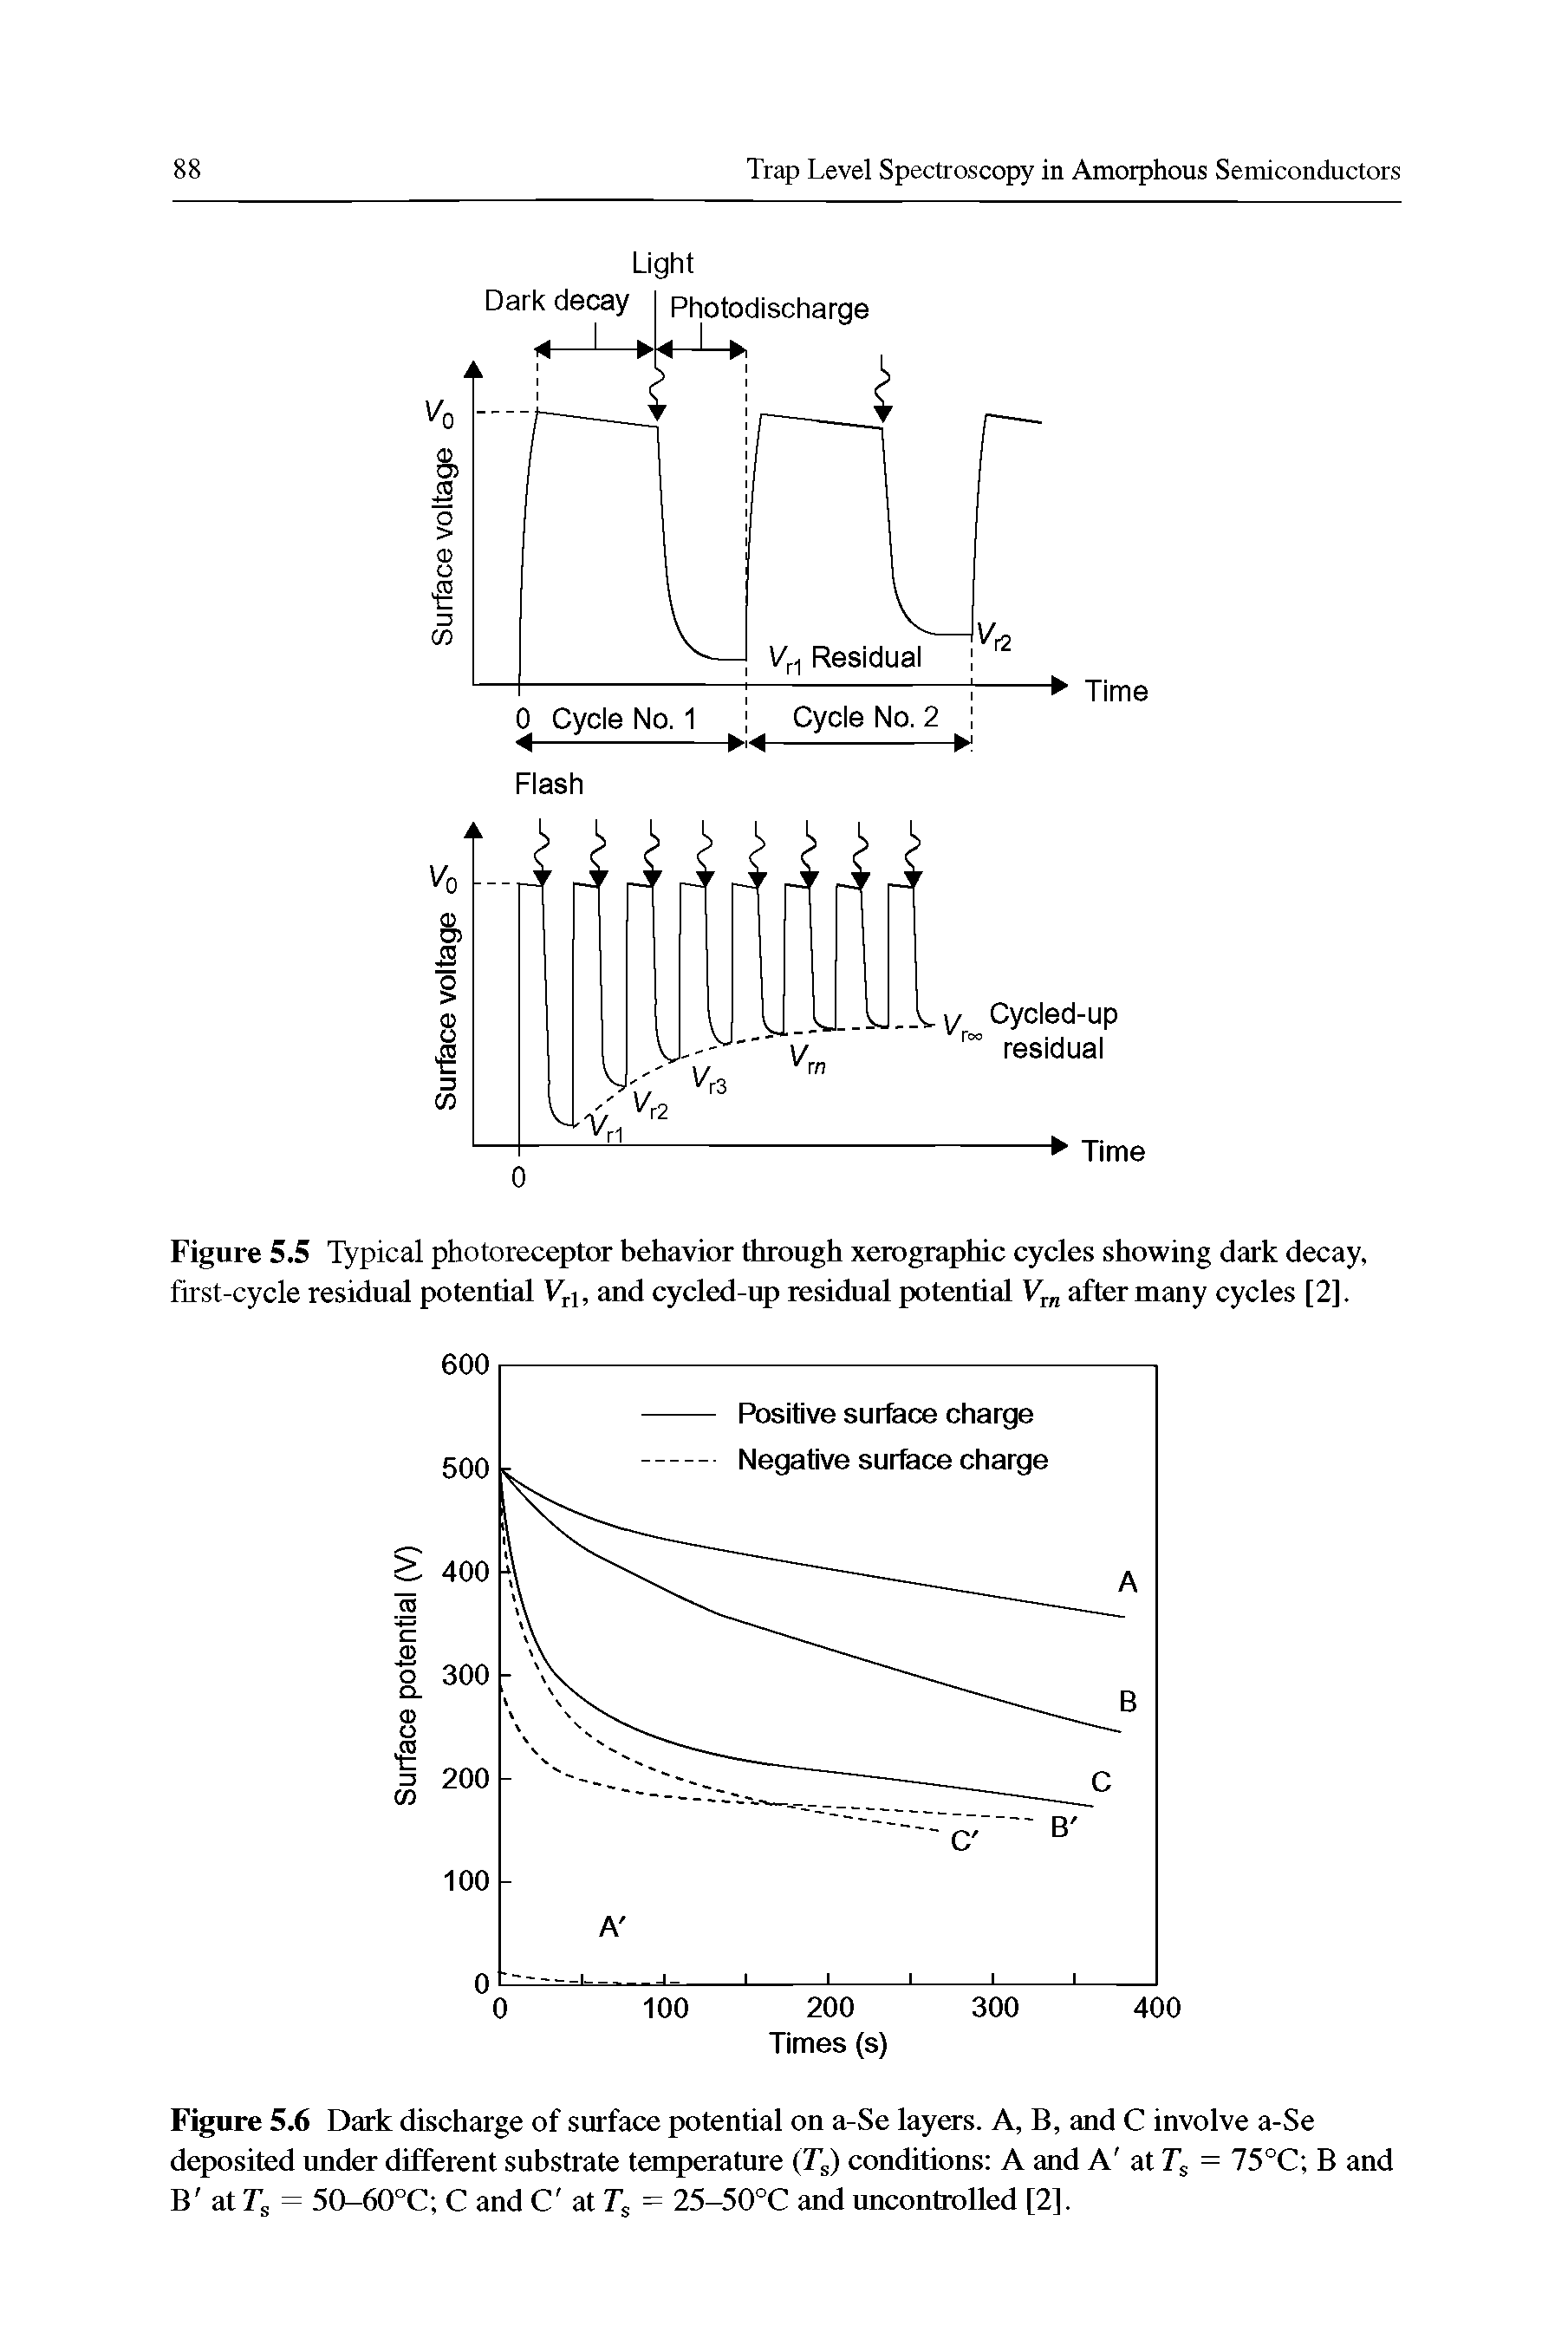 Figure 5.6 Dark discharge of surface potential on a-Se layers. A, B, and C involve a-Se deposited under different substrate temperature (Tj) conditions A and A at = 75°C B and B at Tj = 50-60°C C and C at Fs = 25-50°C and uncontrolled [2].